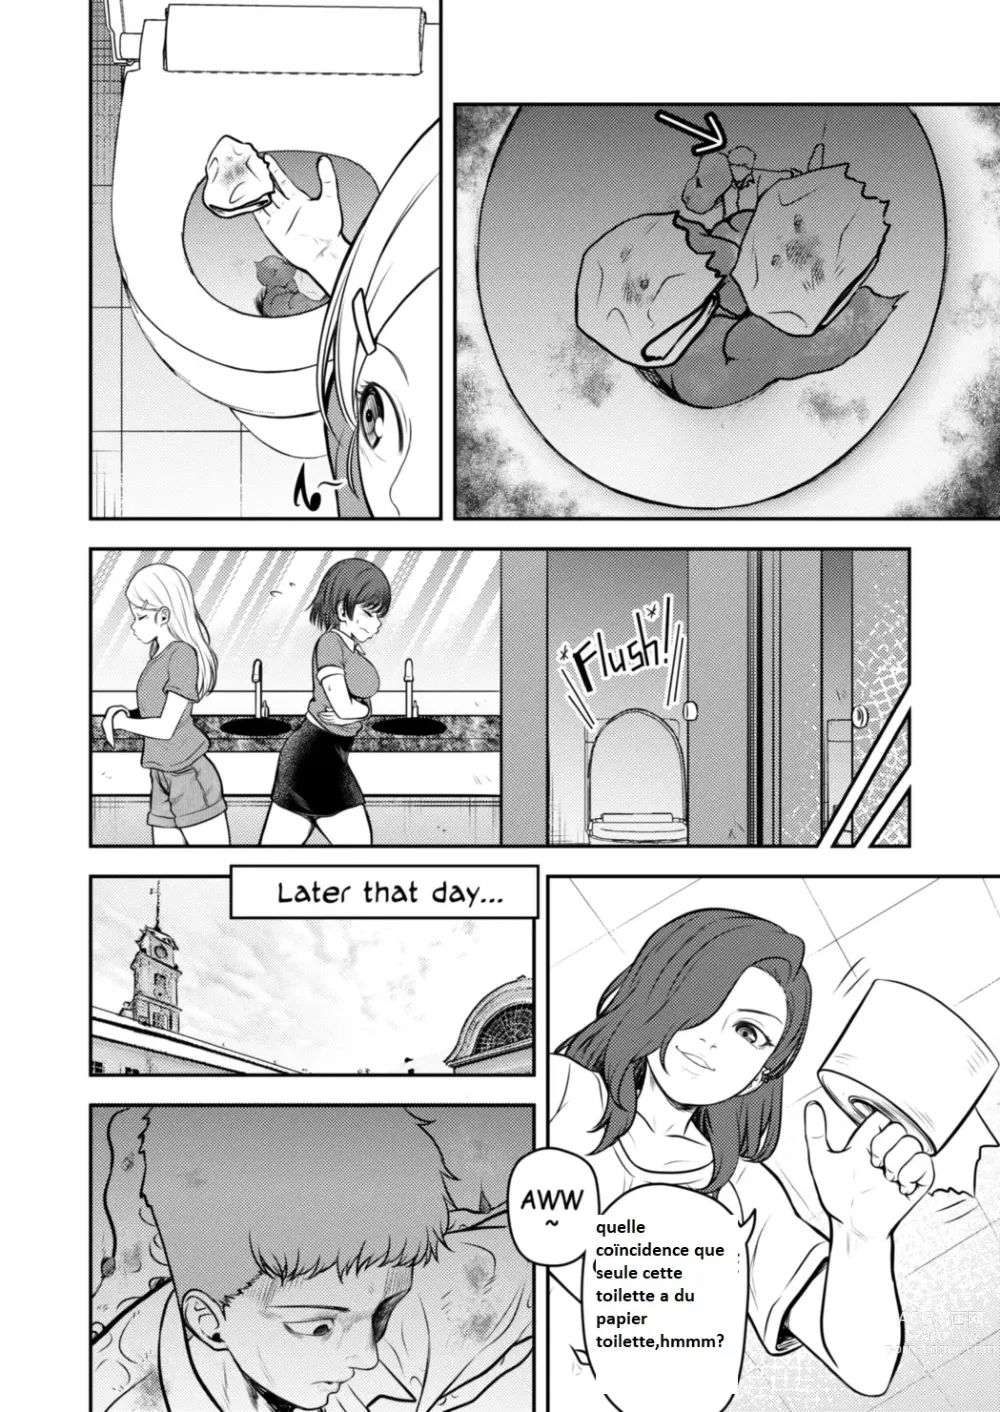 Page 9 of doujinshi Miniguy in toilet